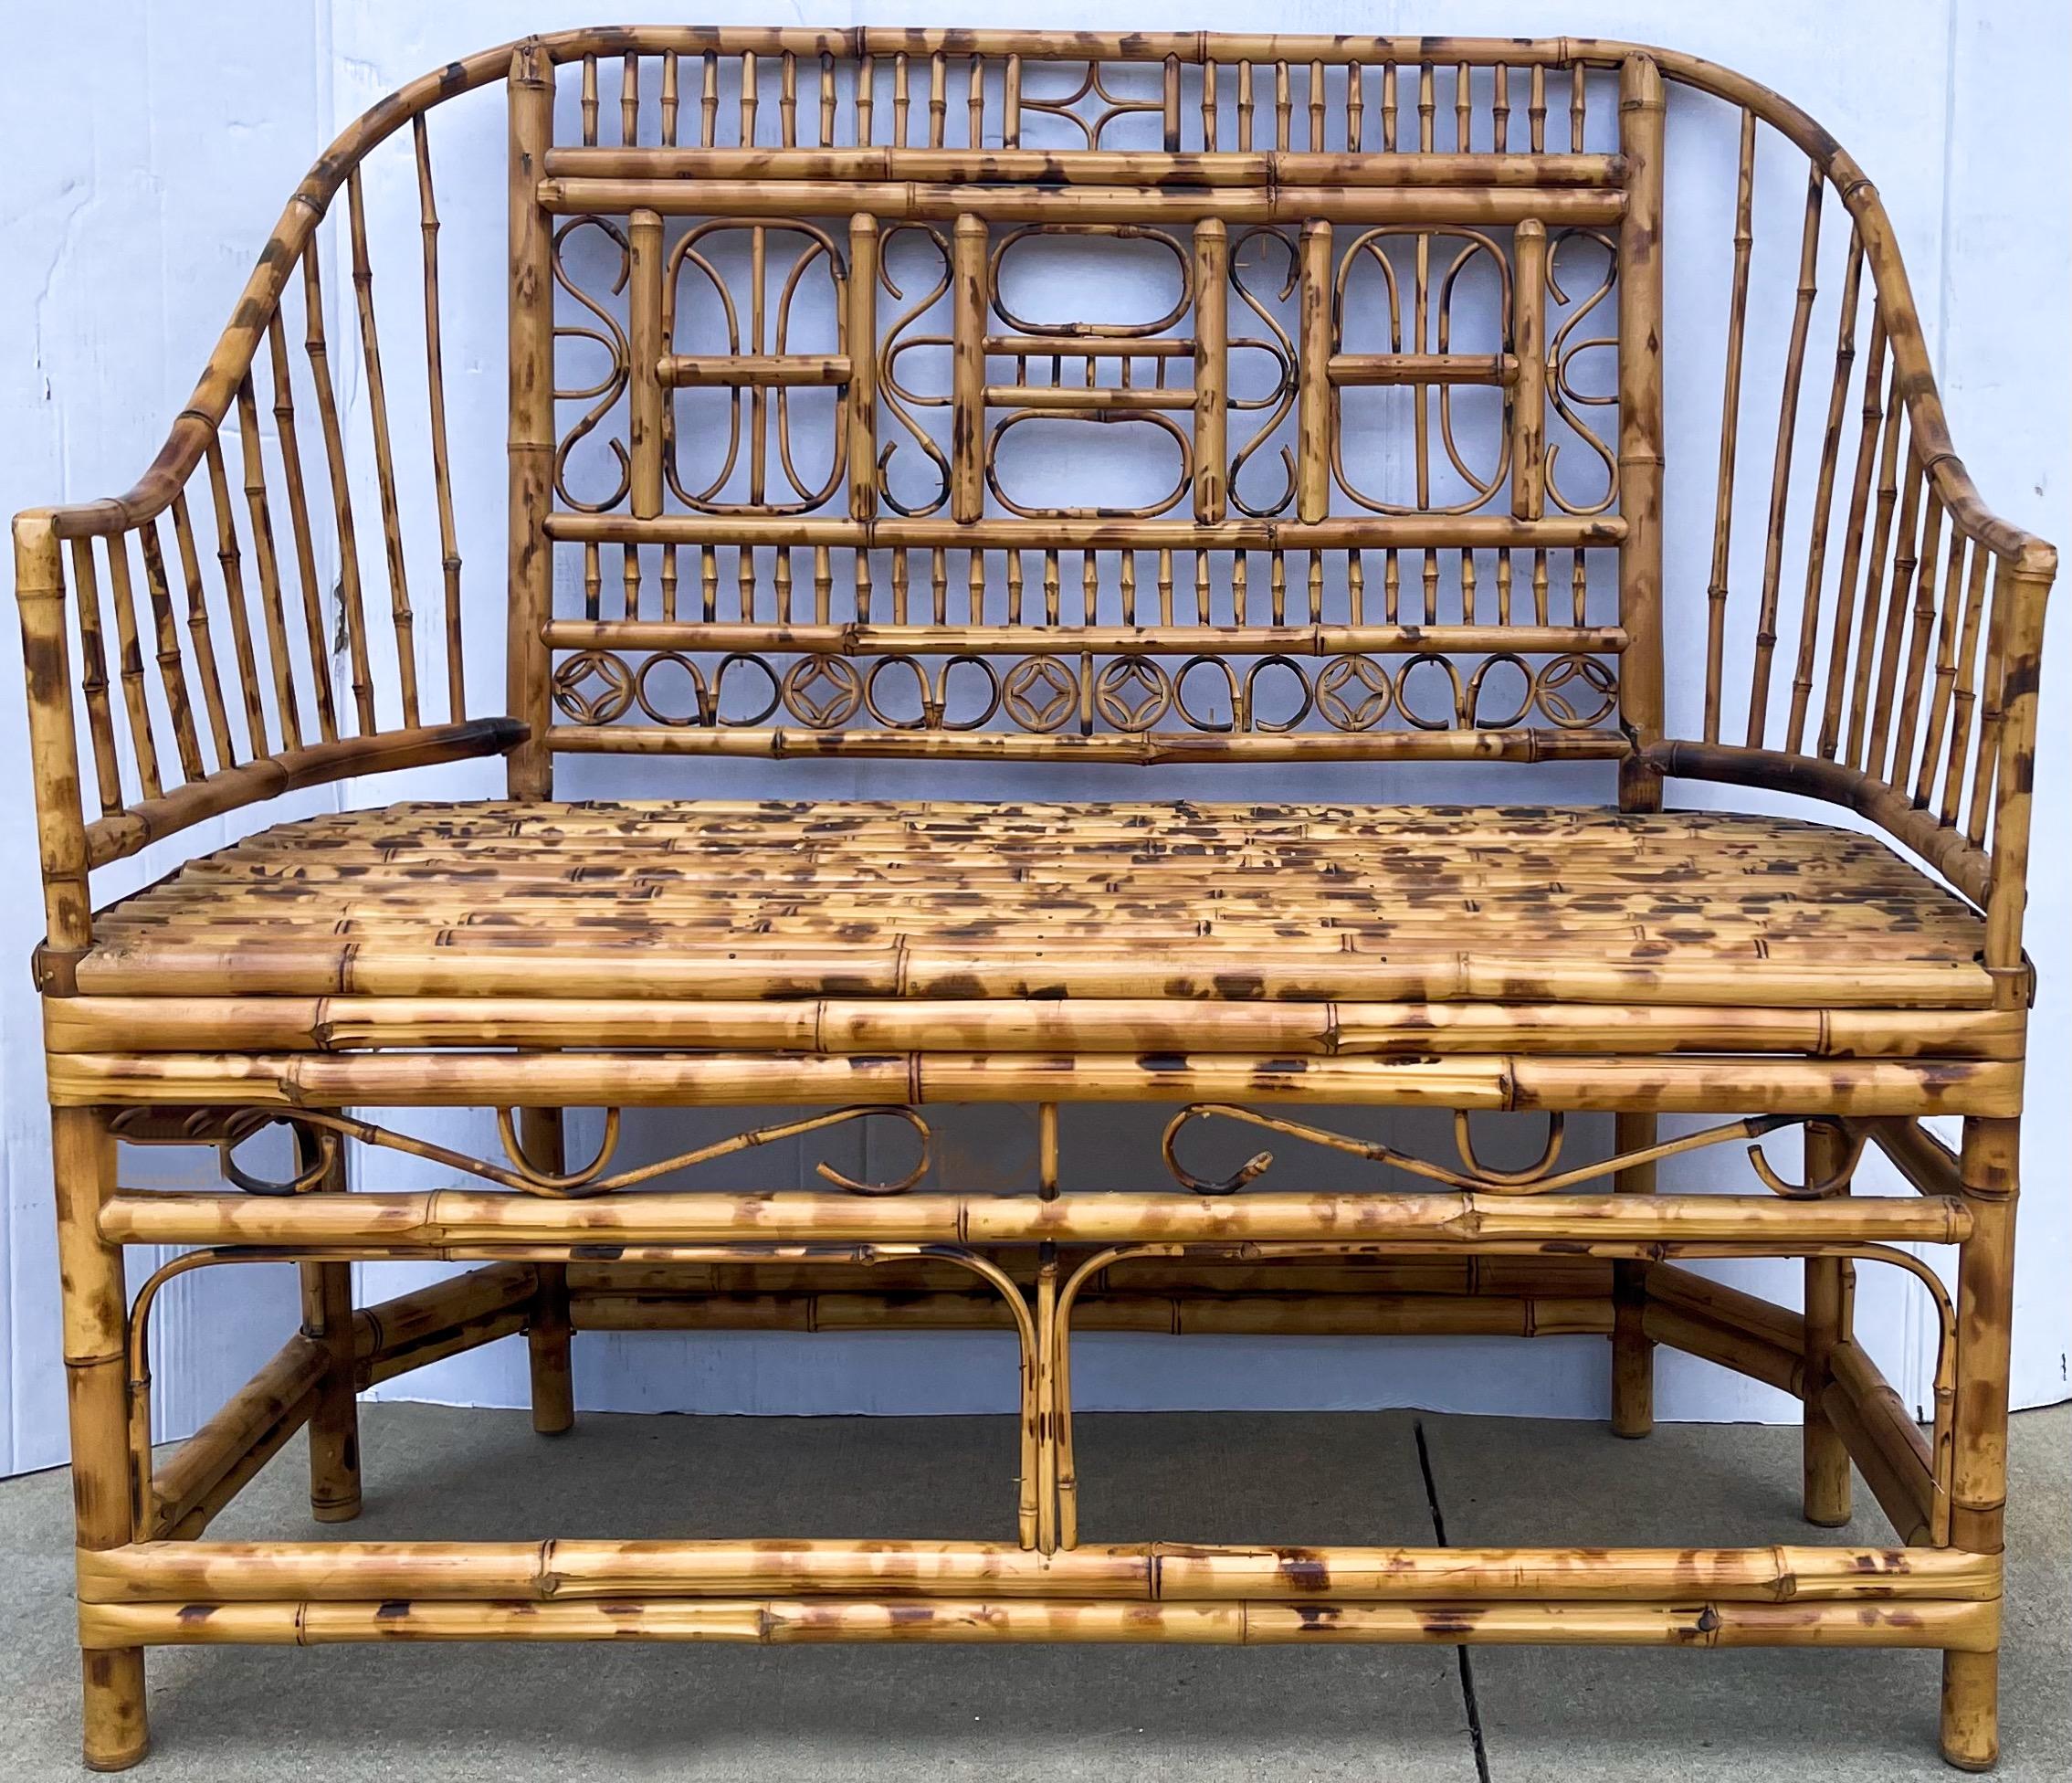 A rare bird! This is a English Brighton Pavilion style burnt bamboo settee. I believe it was probably crafted in China, but it is unmarked. It is actually in very nice vintage condition.

My shipping is only for the Continental US.